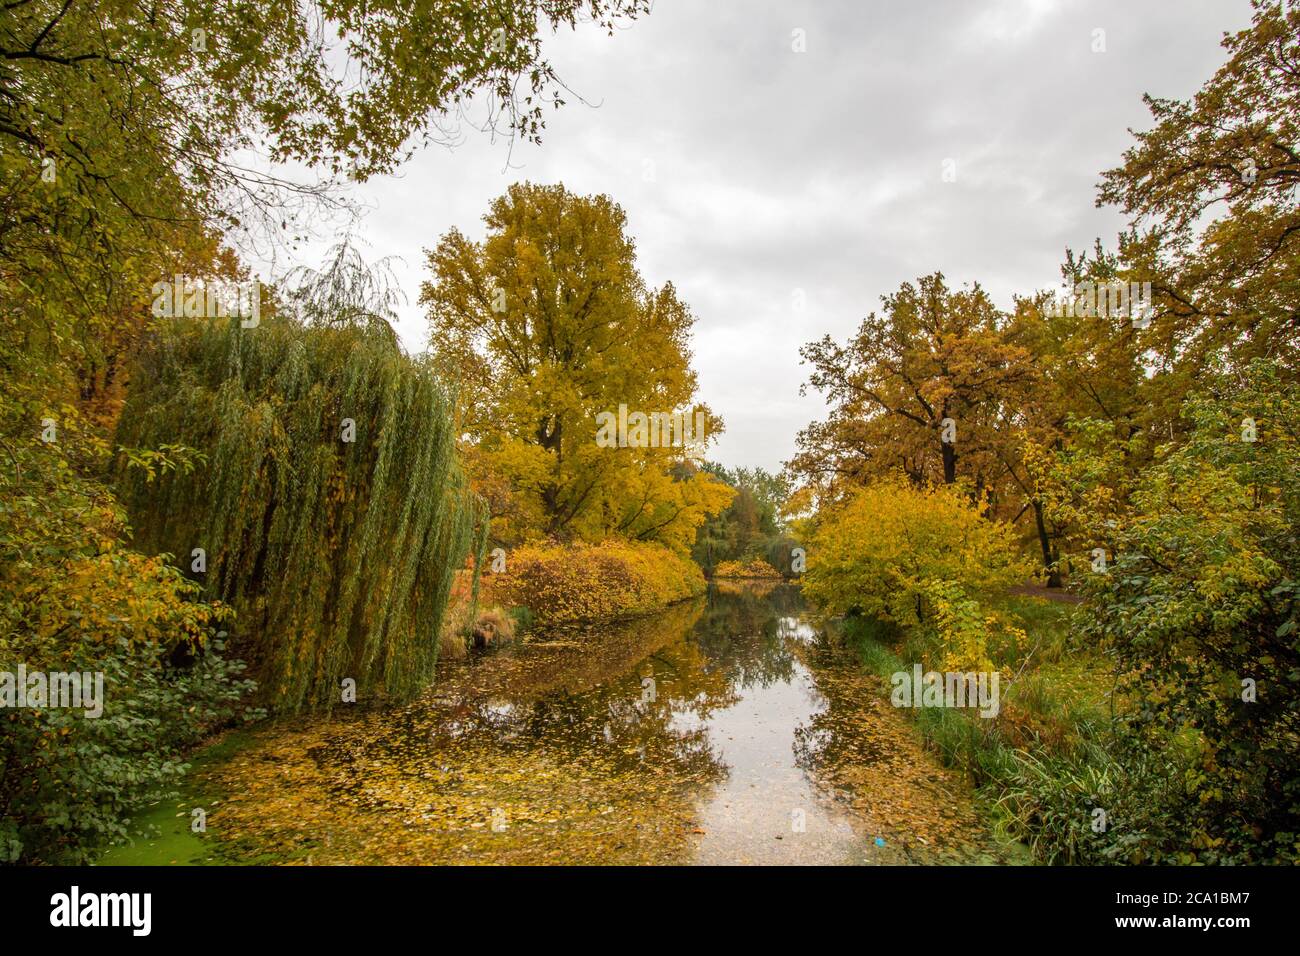 Autumn trees on a cloudy day in a park with a lake. Stock Photo